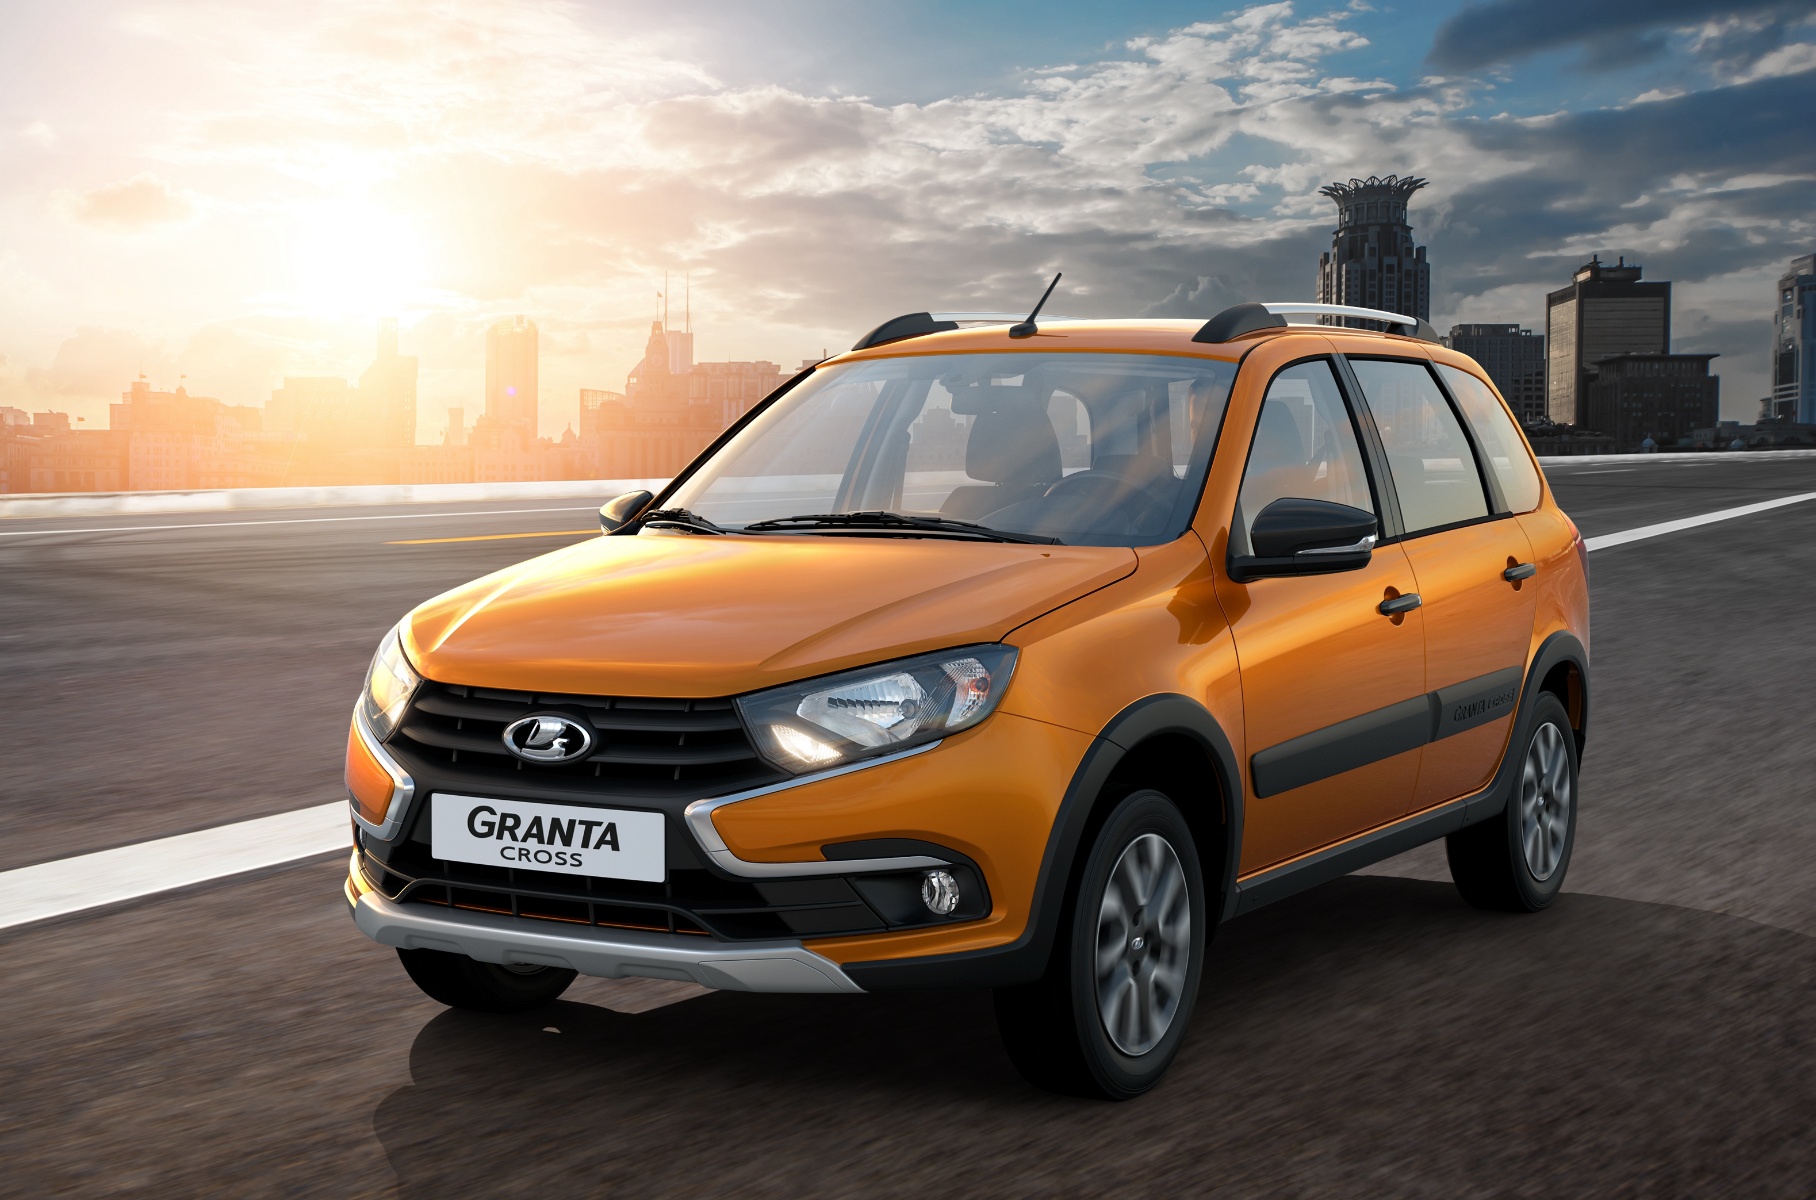 Lada Iskra may displace one model from the Lada Granta family